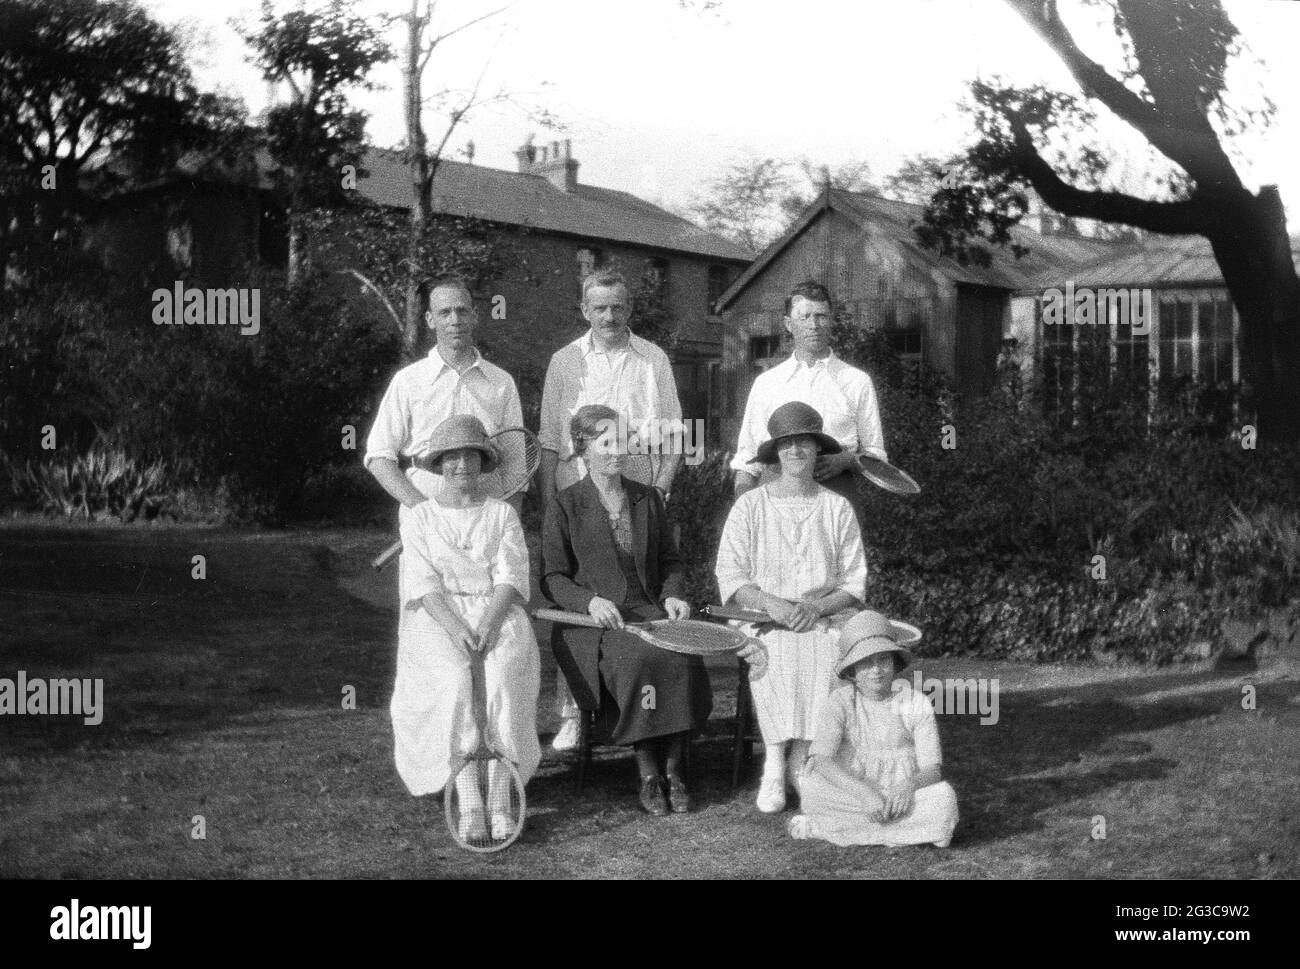 1930s, historical, men and lady tennis players, social players, in the tennis outfits of the era, long skirts, with their wooden racquets, sitting together in a garden for a photo, typically formal as was the norm during this time, England, UK. Stock Photo